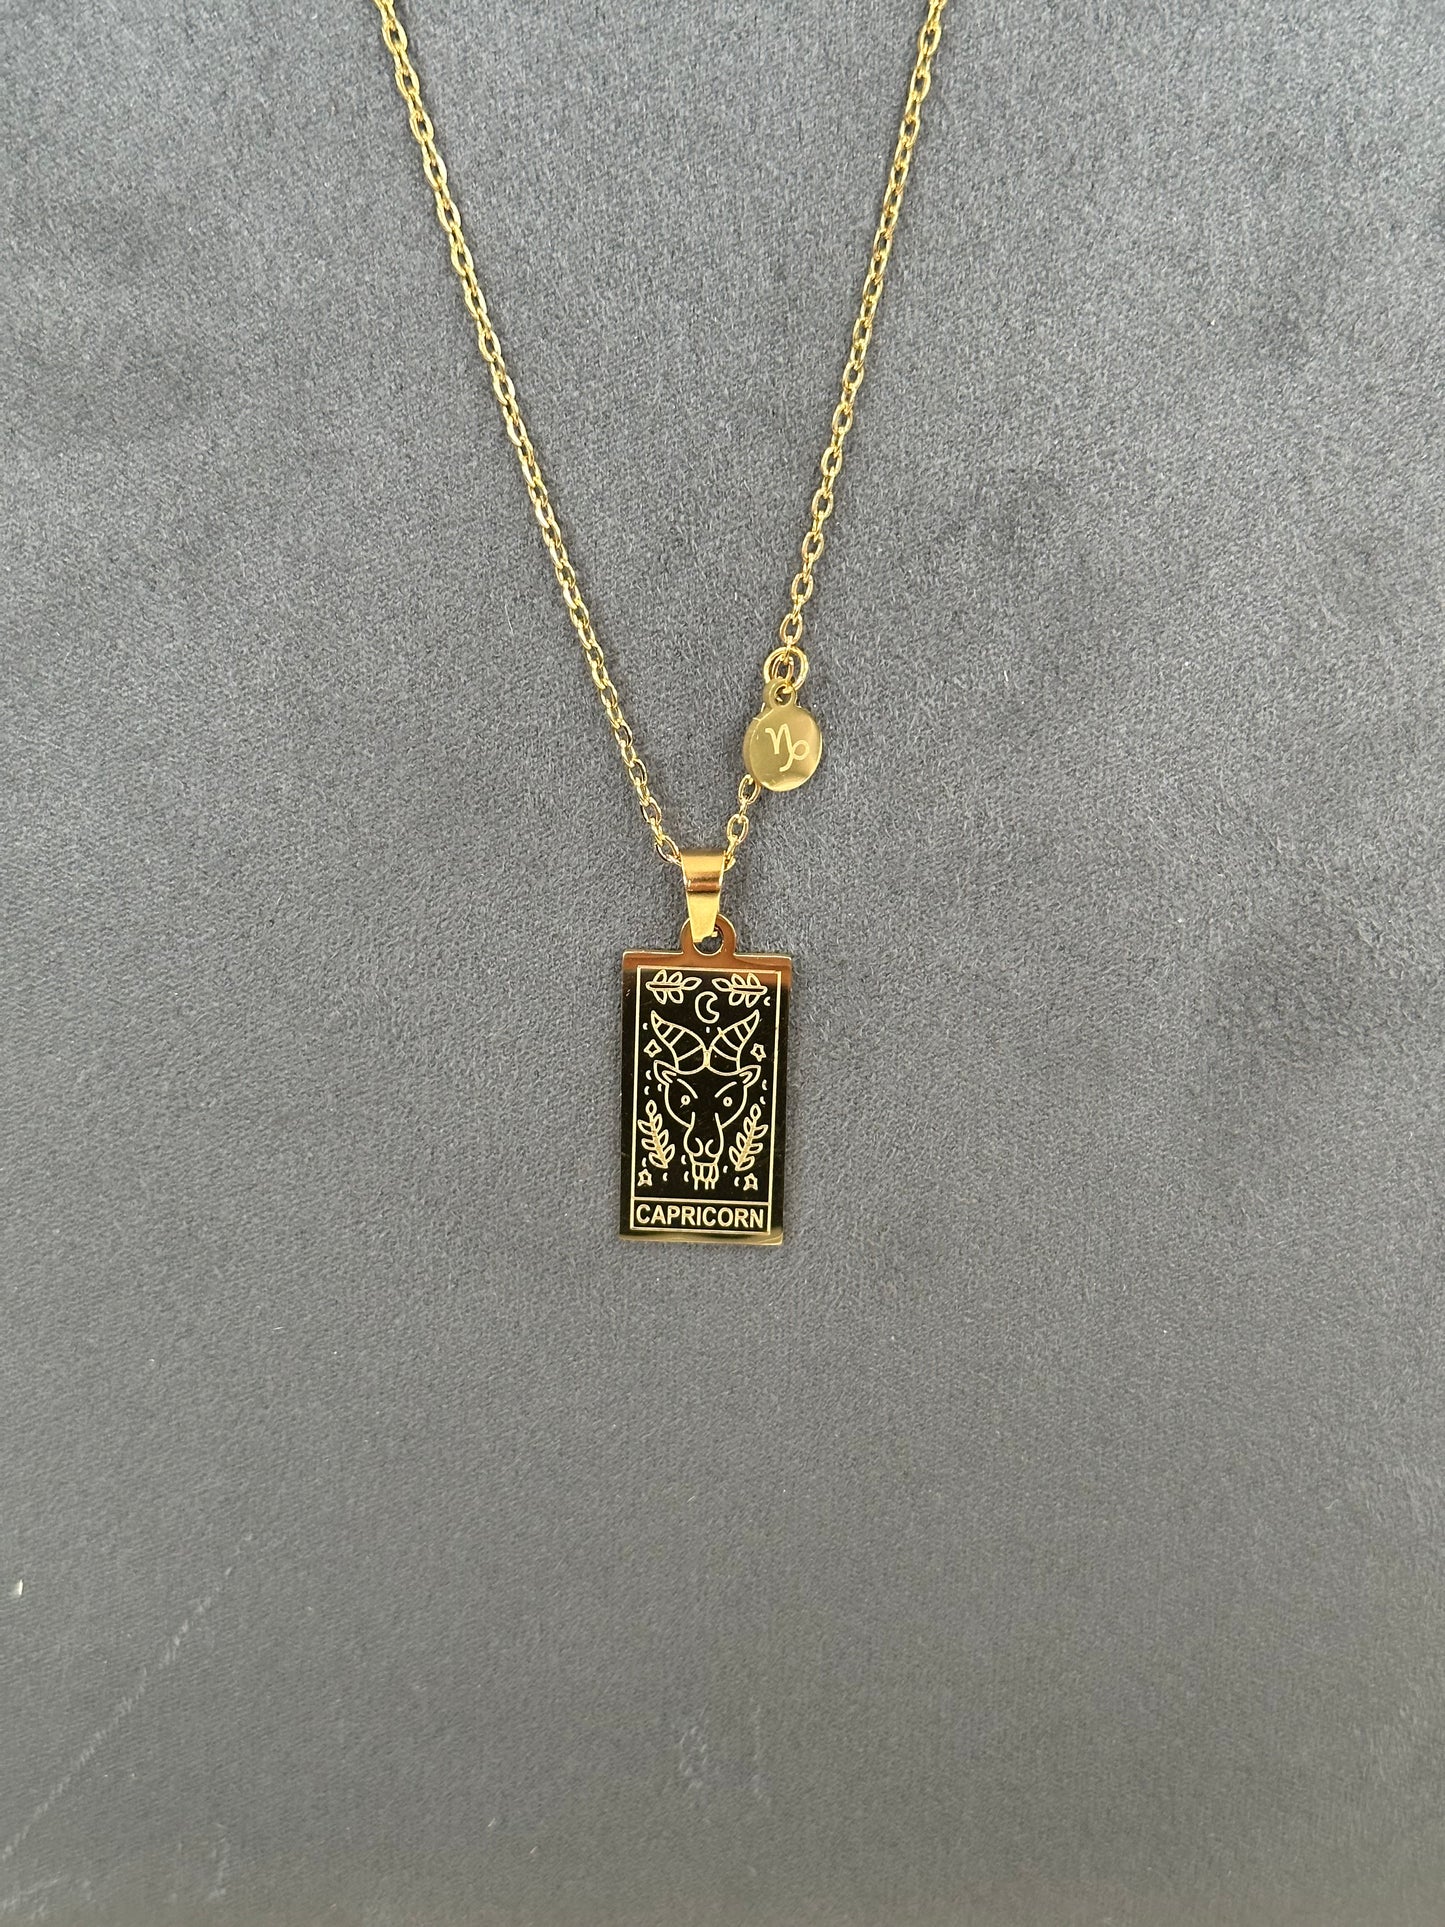 18k Gold Plated Stainless Steel Astrology Necklace